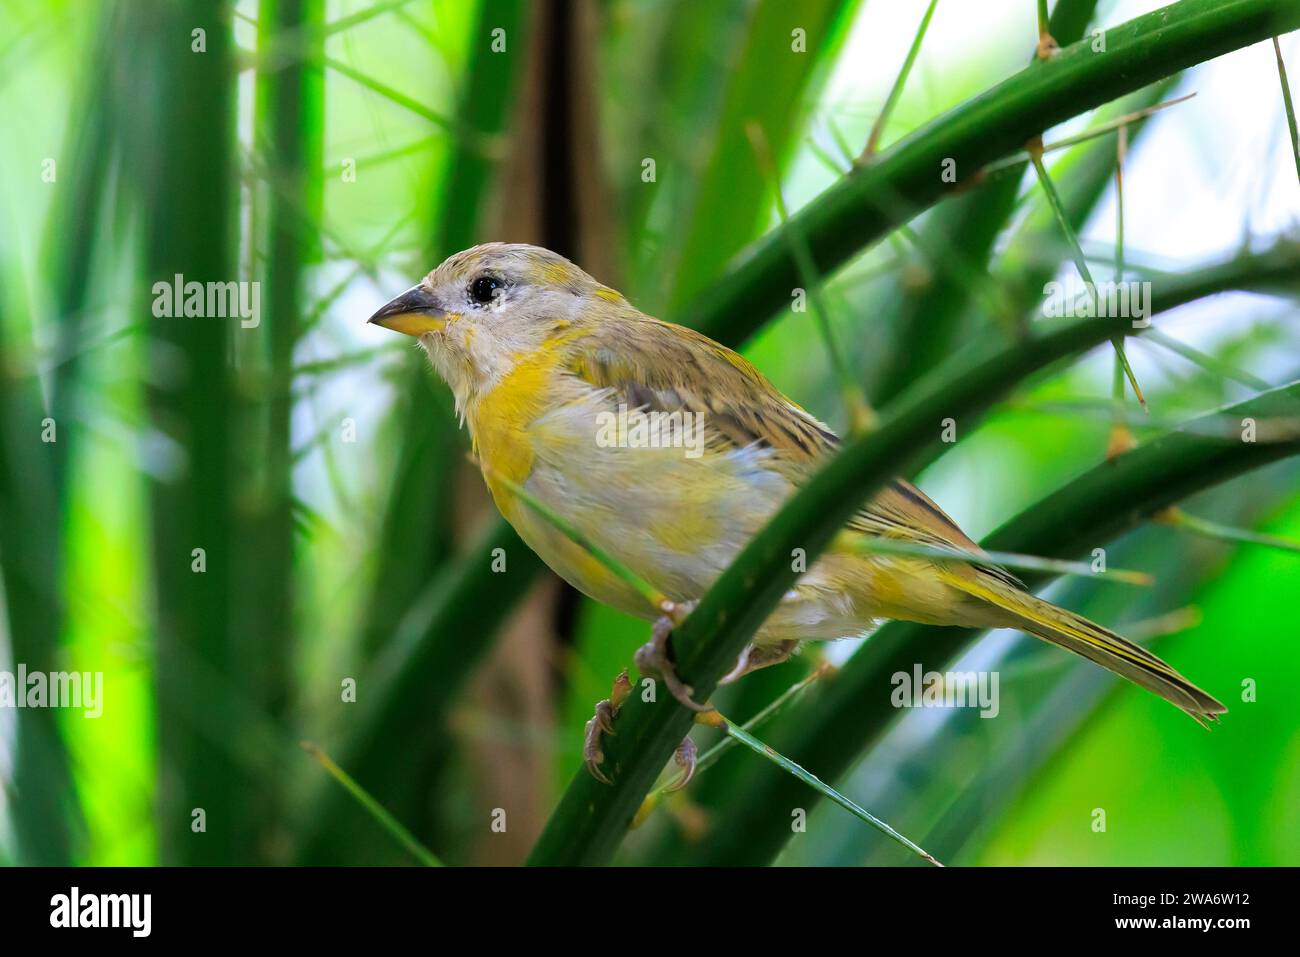 Closeup of a saffron finch, Sicalis flaveola, perched in a forest. Stock Photo